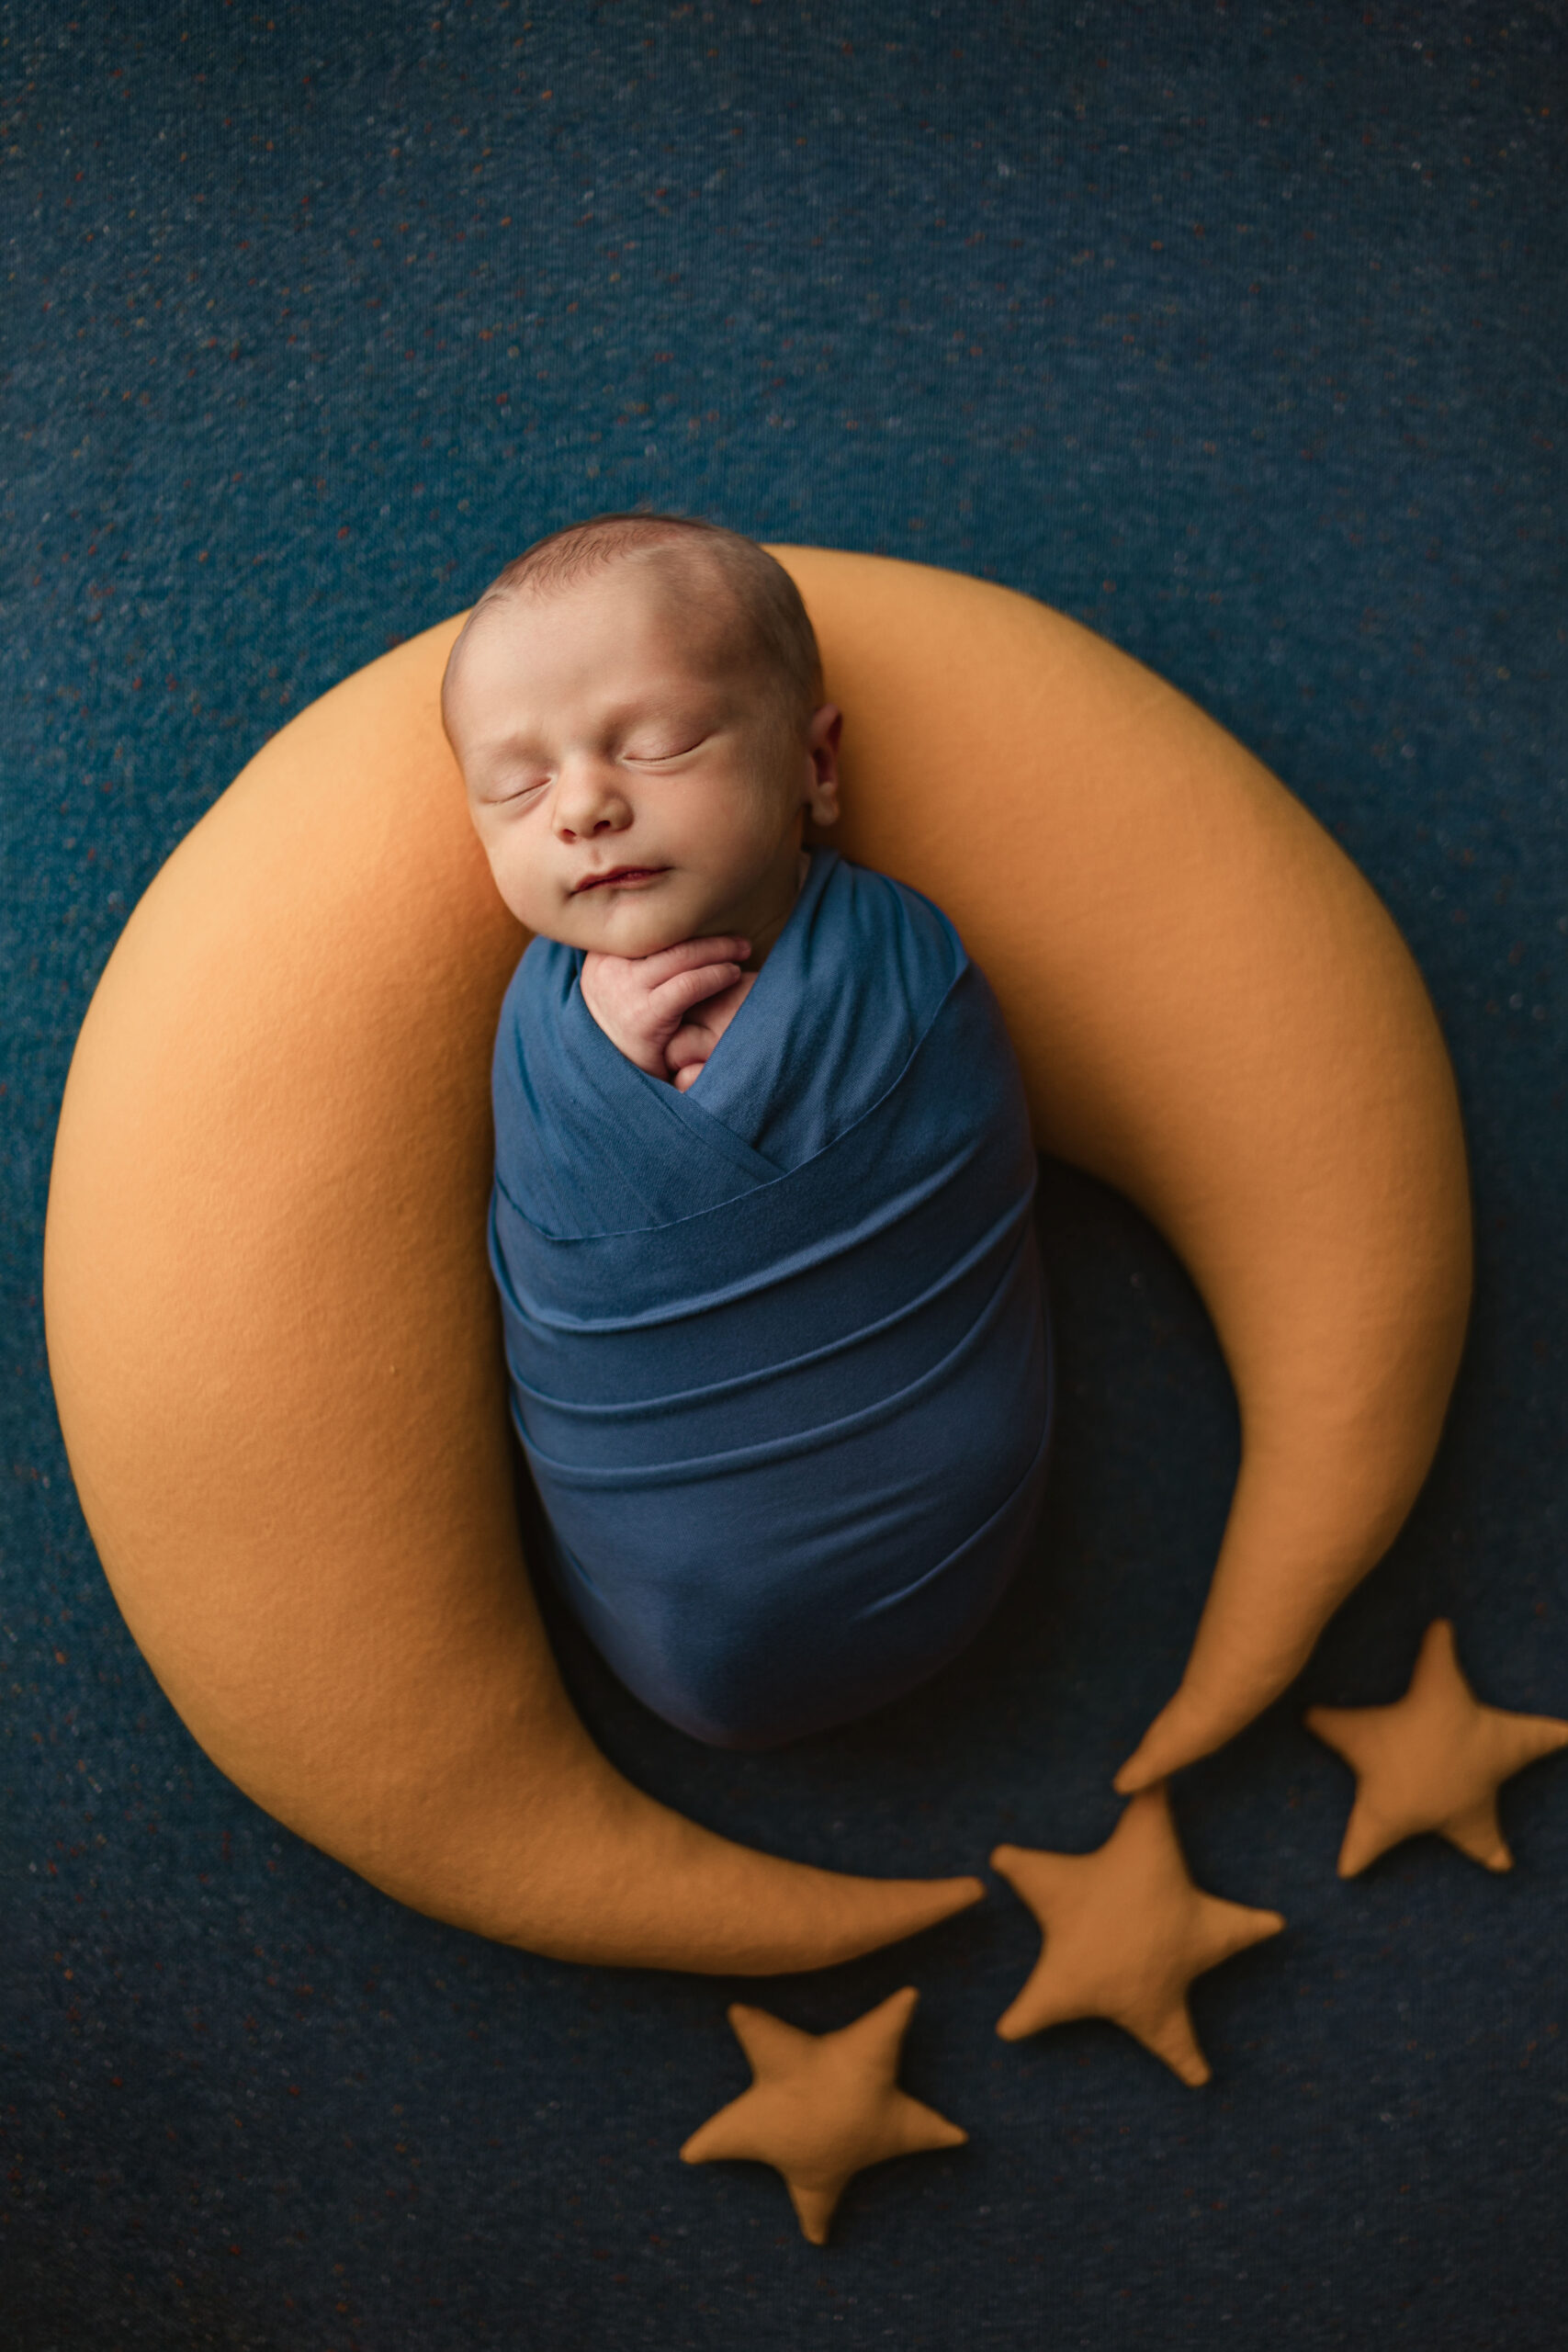 newborn baby wrapped in blue laying on a gold moon pillow